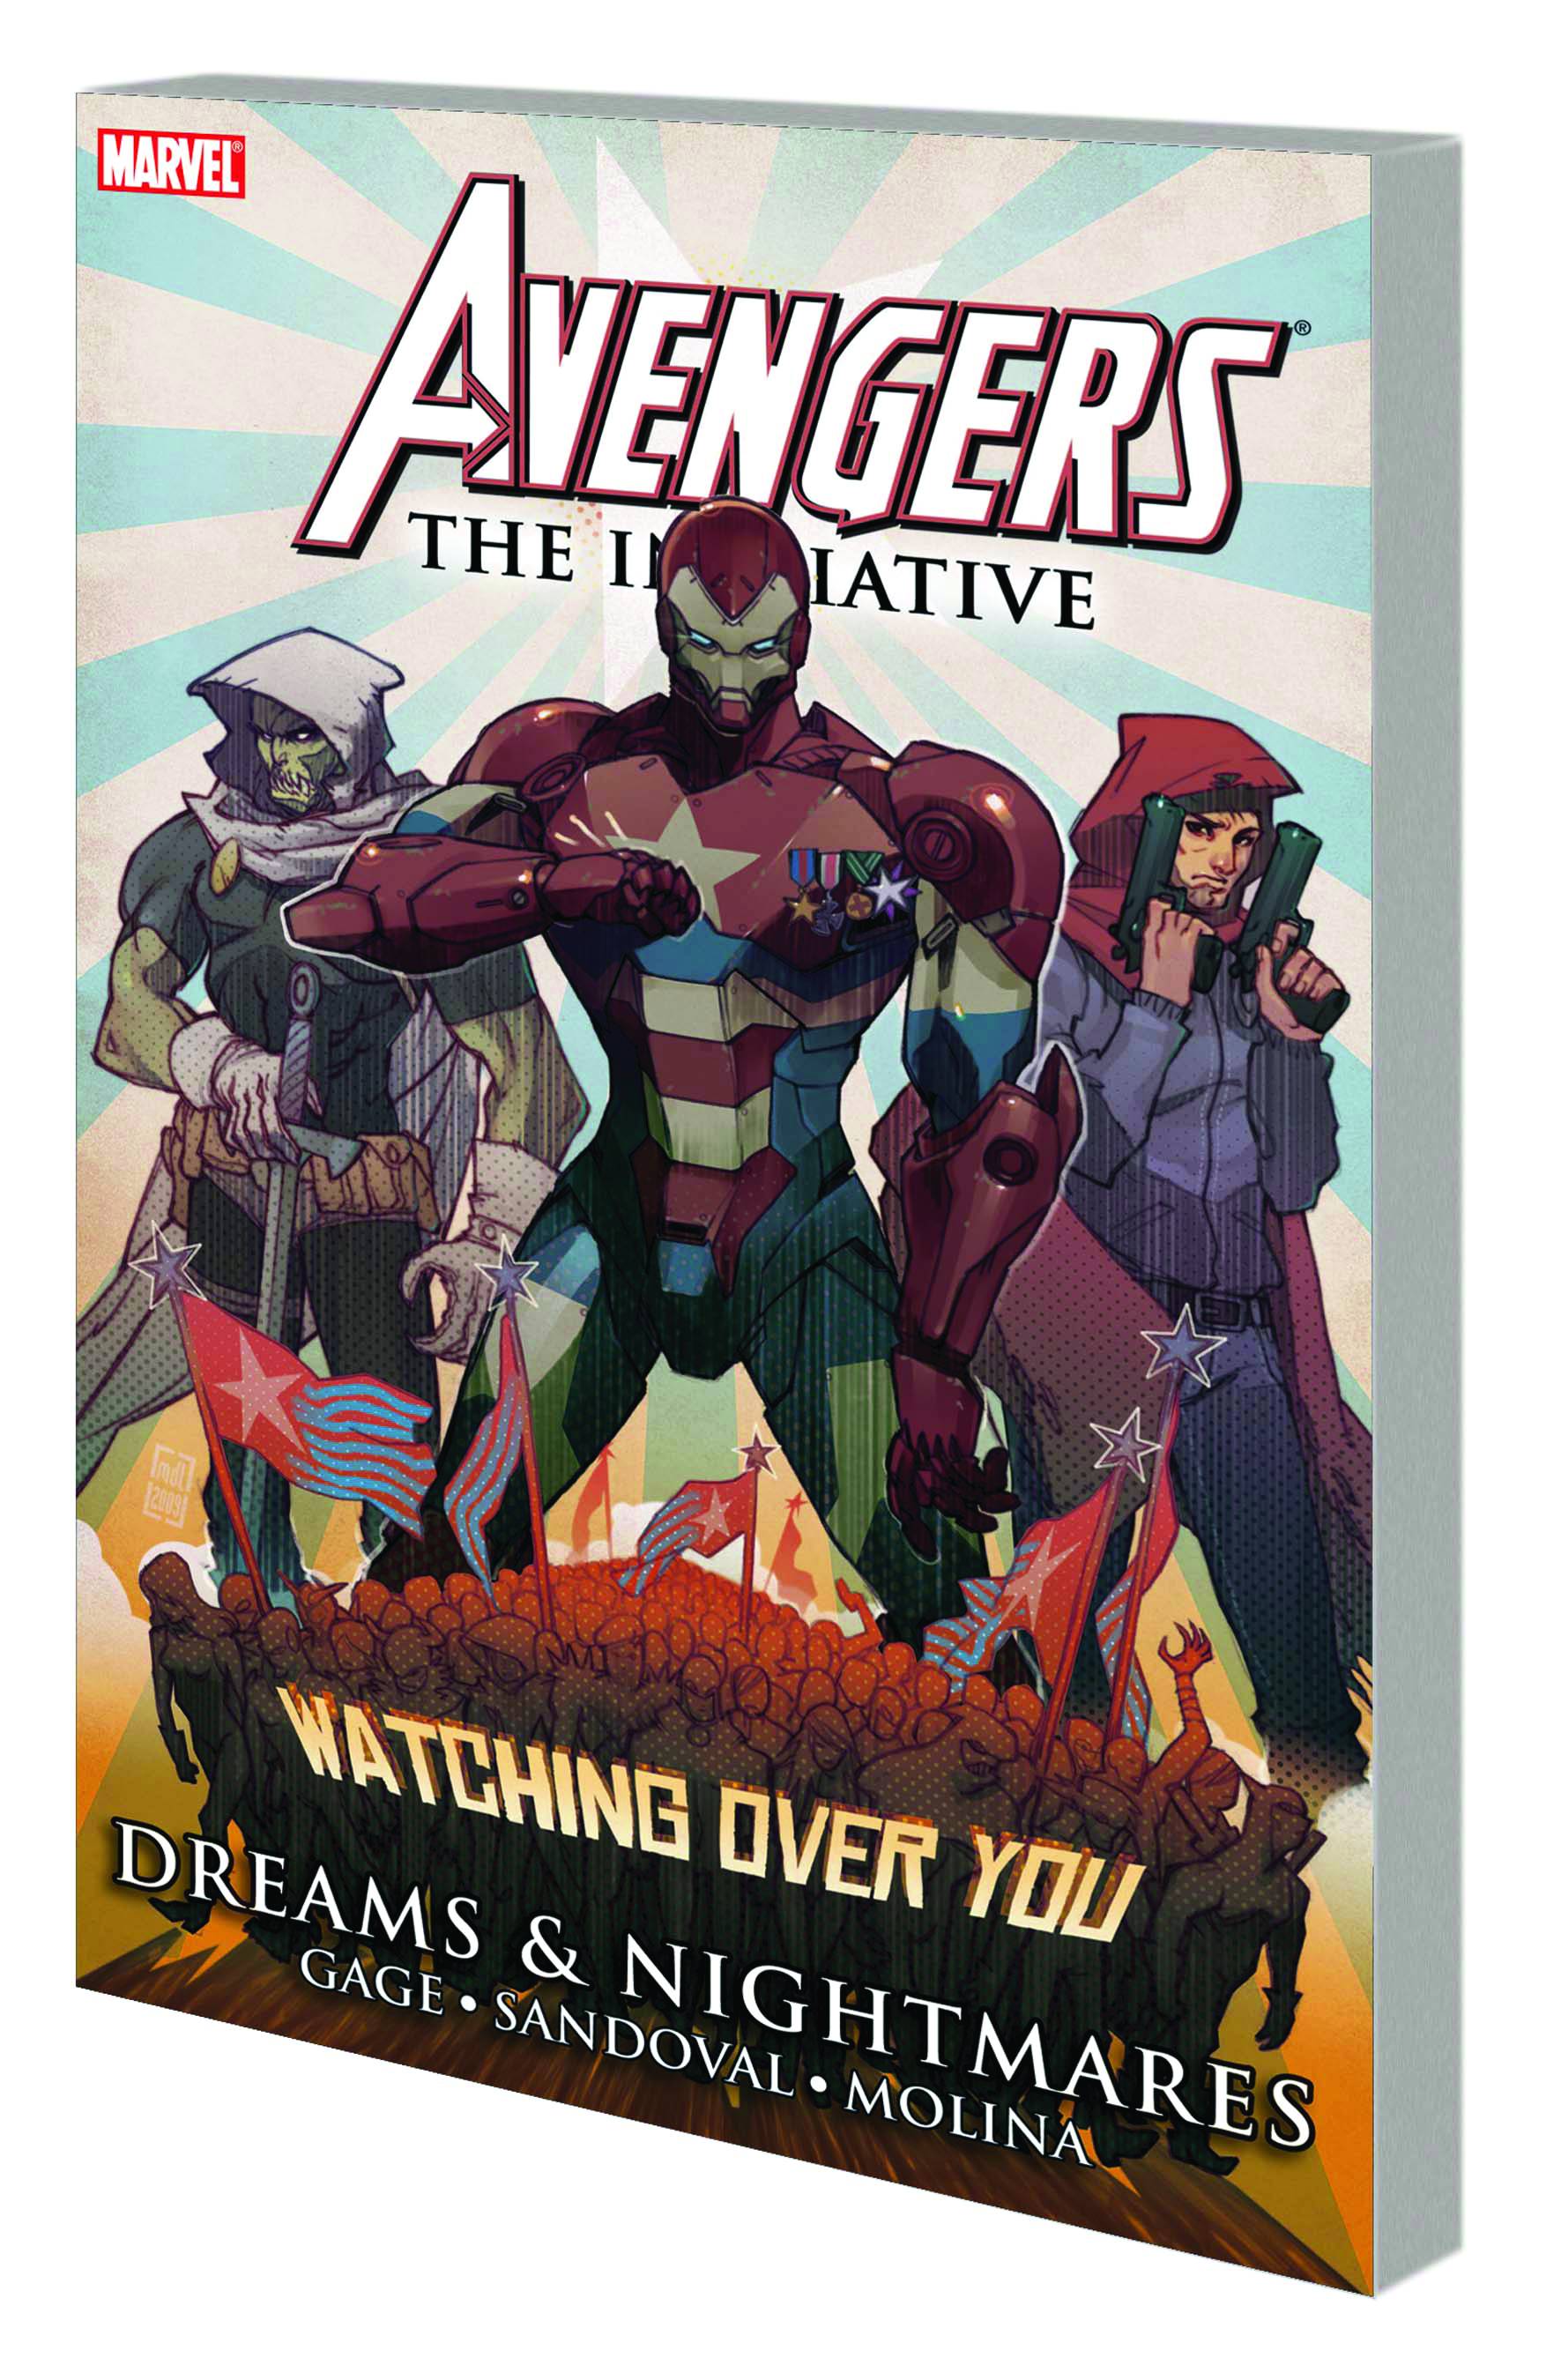 Avengers: The Initiative TP DREAMS AND NIGHTMARES